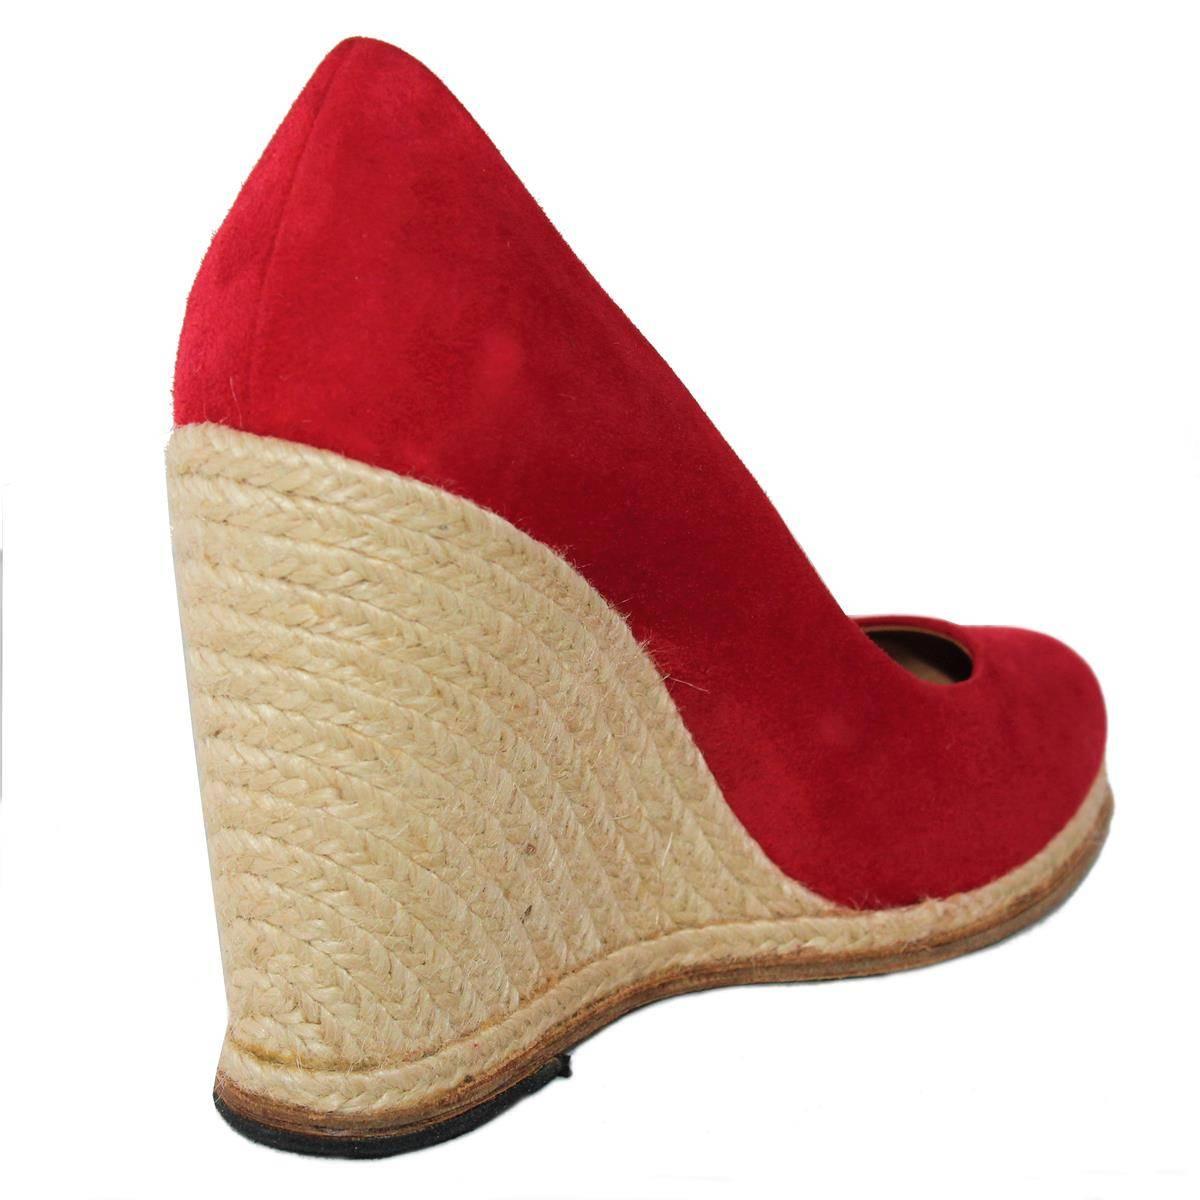 Beautiful Salvatore Ferragamo wedge shoe
Suede
Red color
Straw wedge
Heel height cm 11 (4.33 inches)
Size: 38 1/2 
Made in Italy
Worldwide express shipping included in the price !